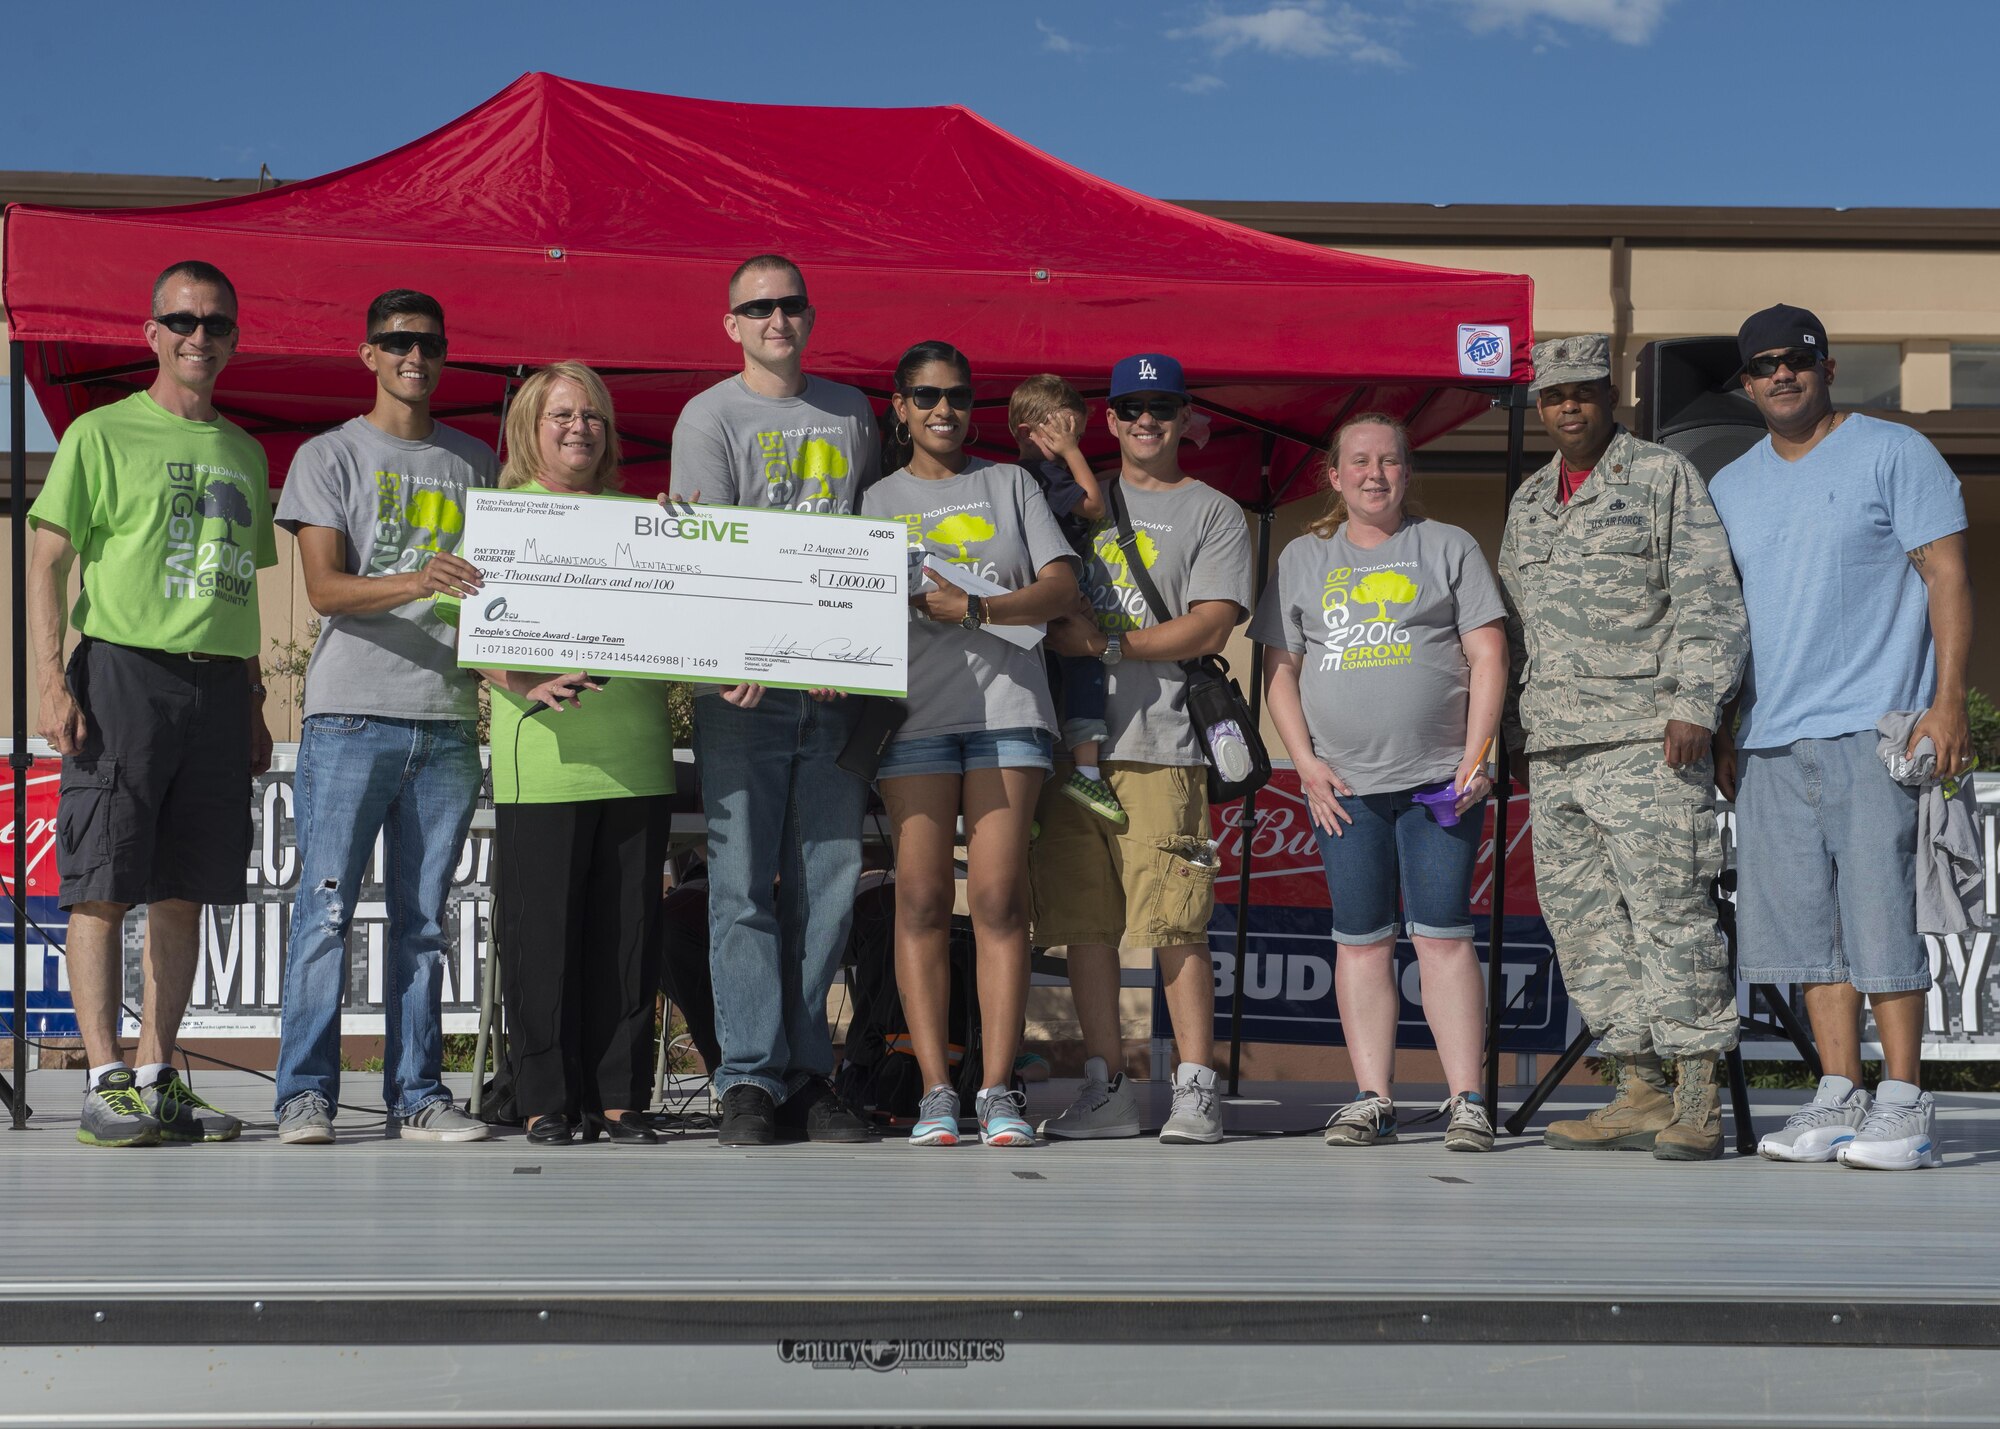 Members from the 49th Maintenance Squadron’s Magnanimous Maintainers receive their $1,000 reward for winning the People’s Choice Large Team Award at the Big Give after-party August 12, 2016 at Holloman Air Force Base, N.M. Over the course of three weeks, 32 teams of 412 participants spent nearly 5,000 man hours volunteering in the local community — saving the area $202,092.33. (Last names are being withheld due to operational requirements. U.S. Air Force photo by Airman 1st Class Randahl J. Jenson)